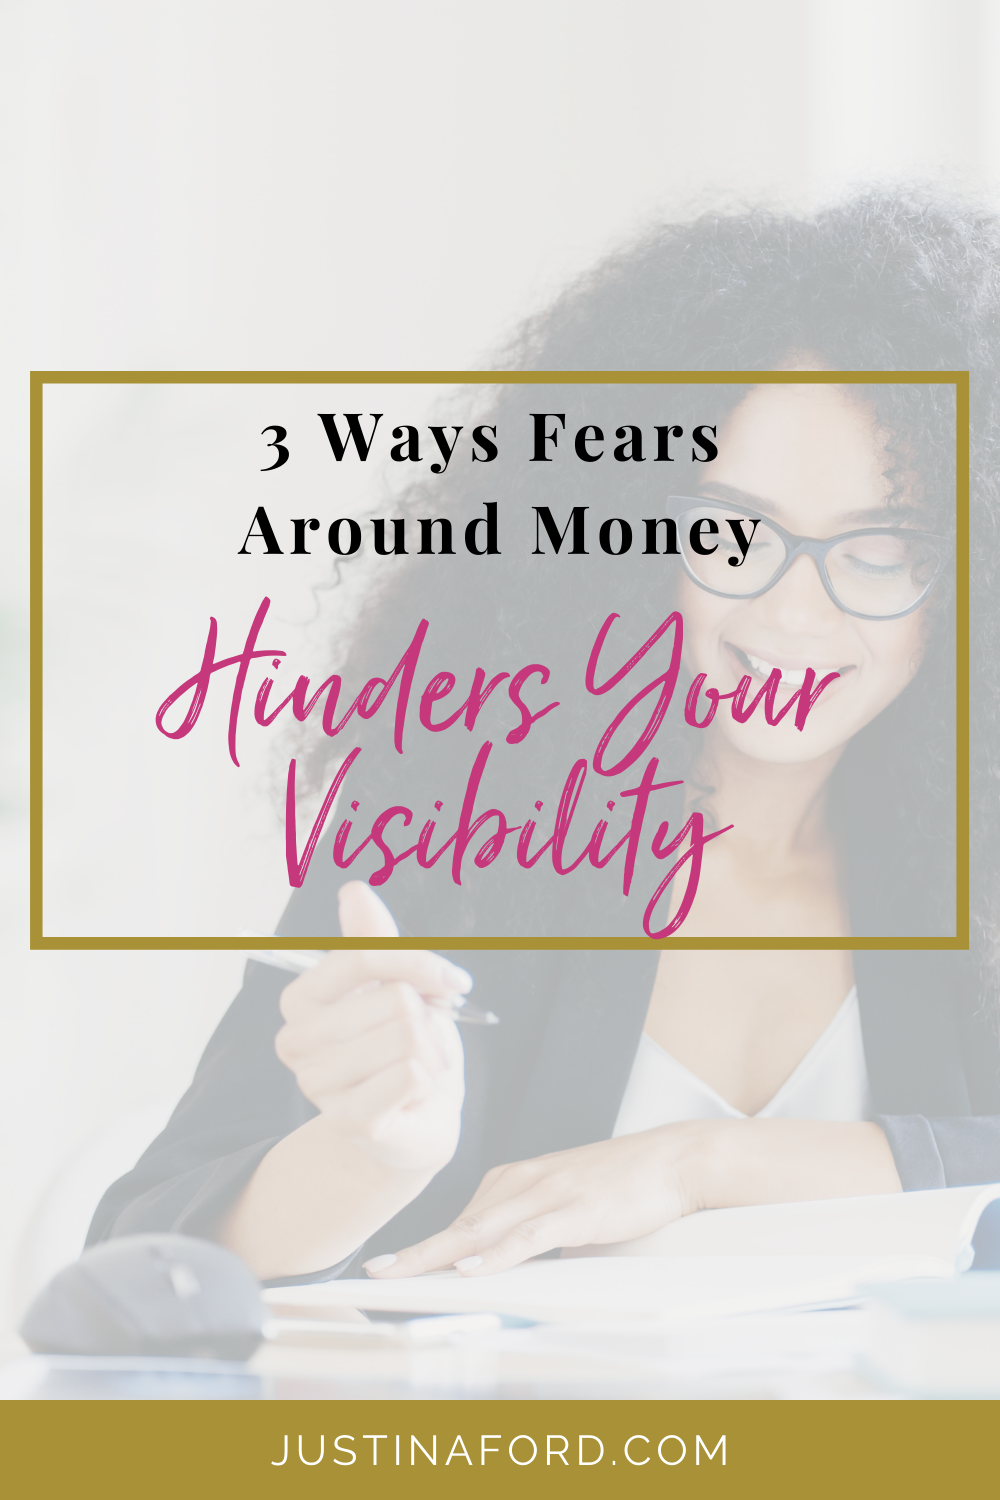 2 ways fears around money hinders your visibility.